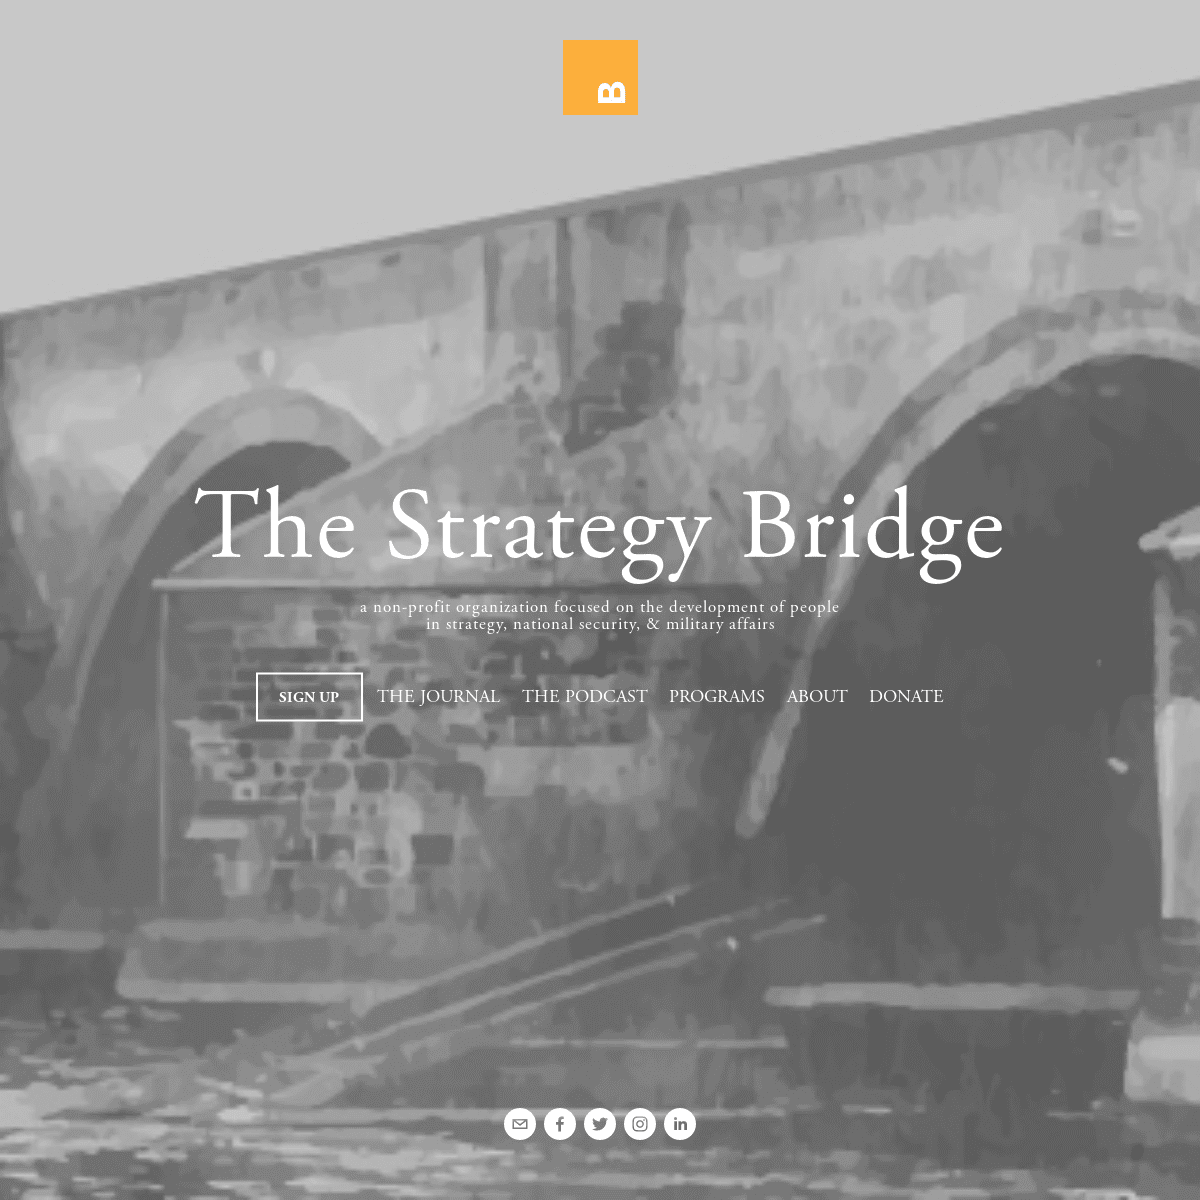 A complete backup of thestrategybridge.org